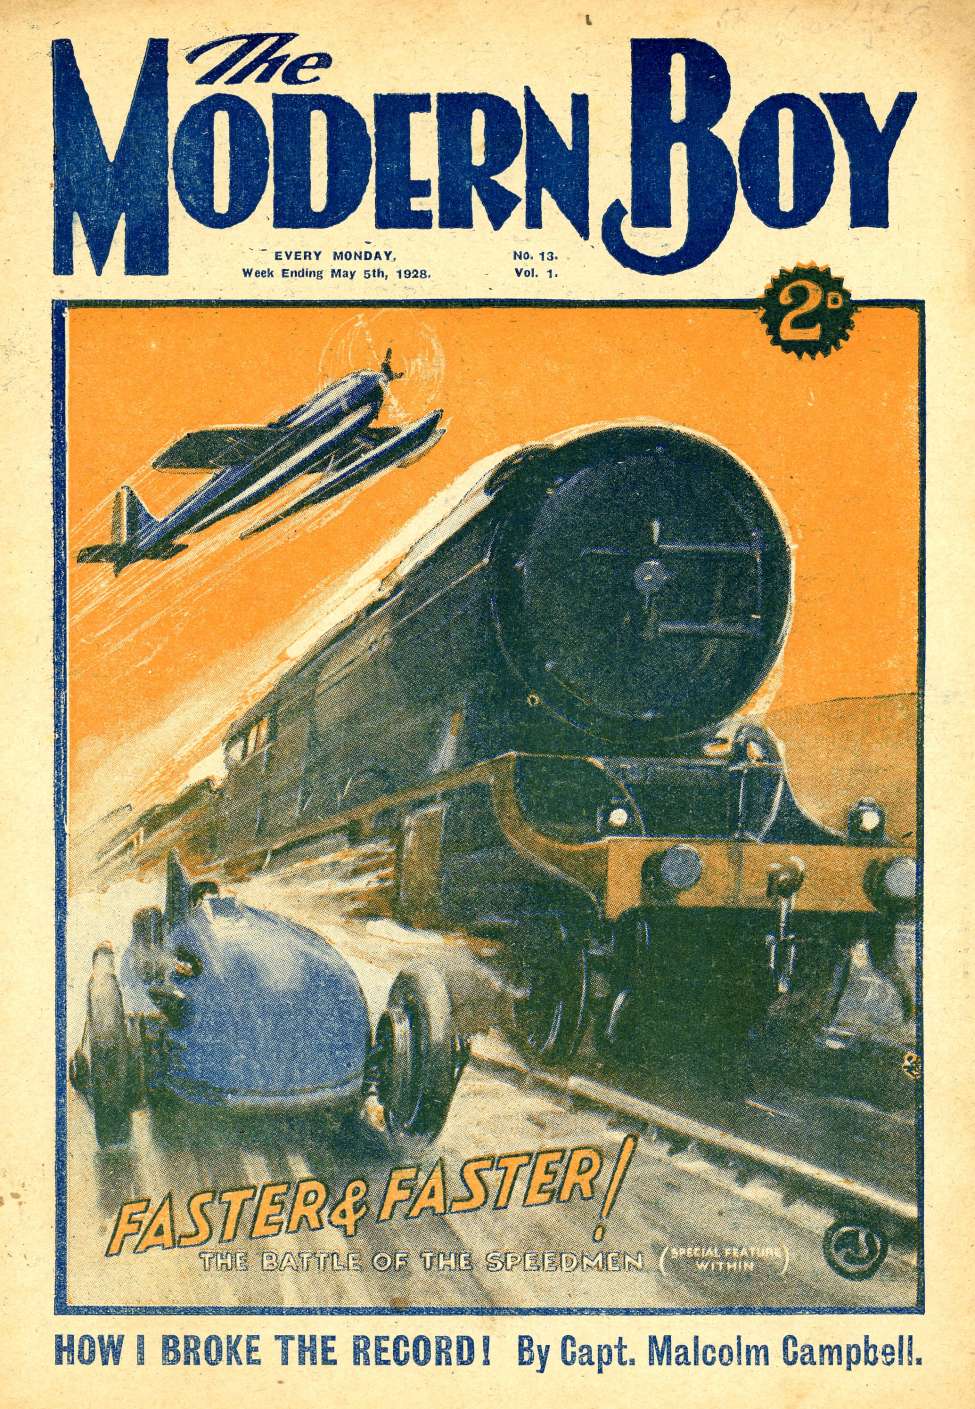 Comic Book Cover For The Modern Boy 13 - Faster & Faster